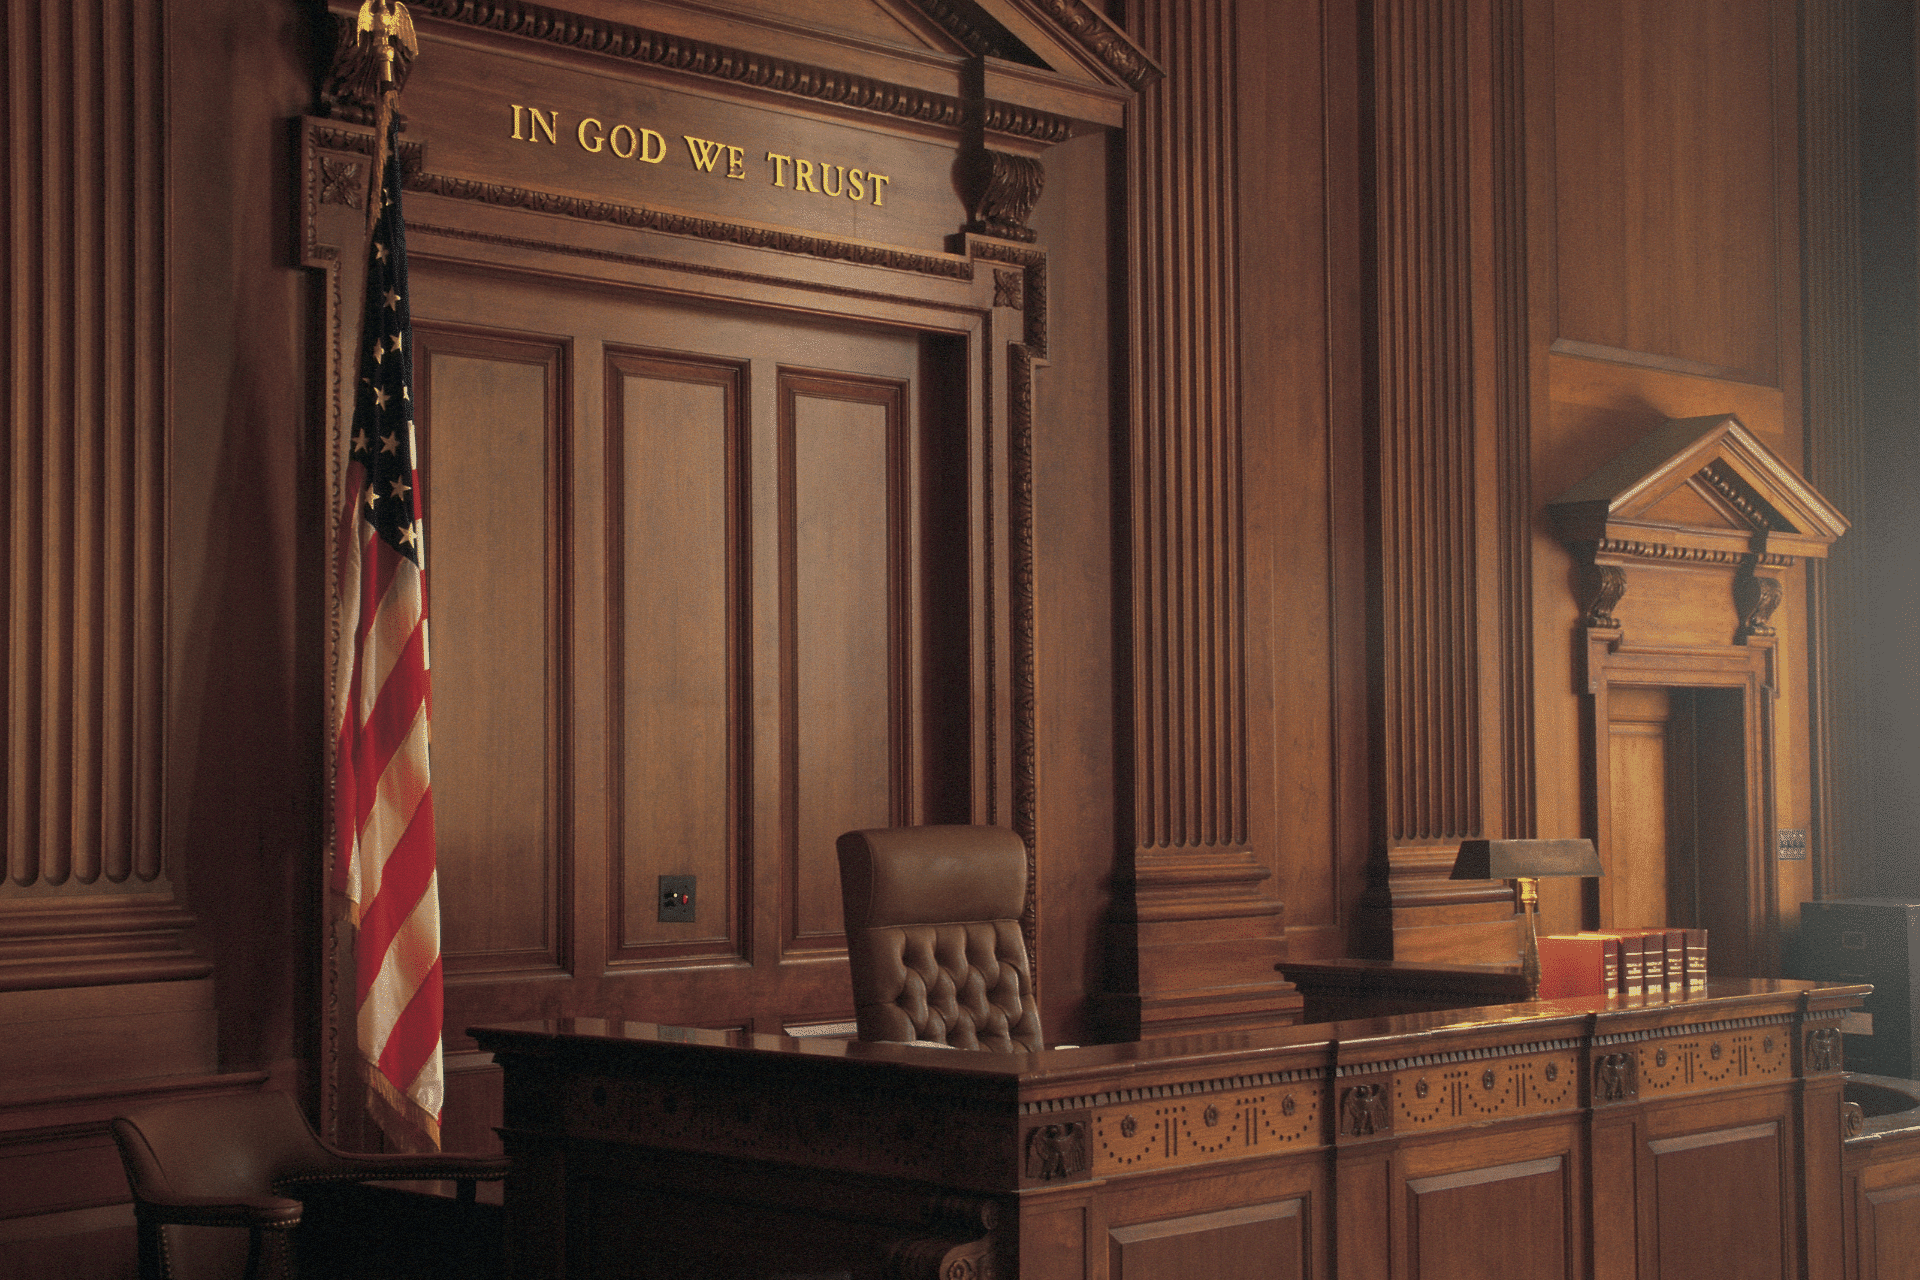 interior of a courtroom